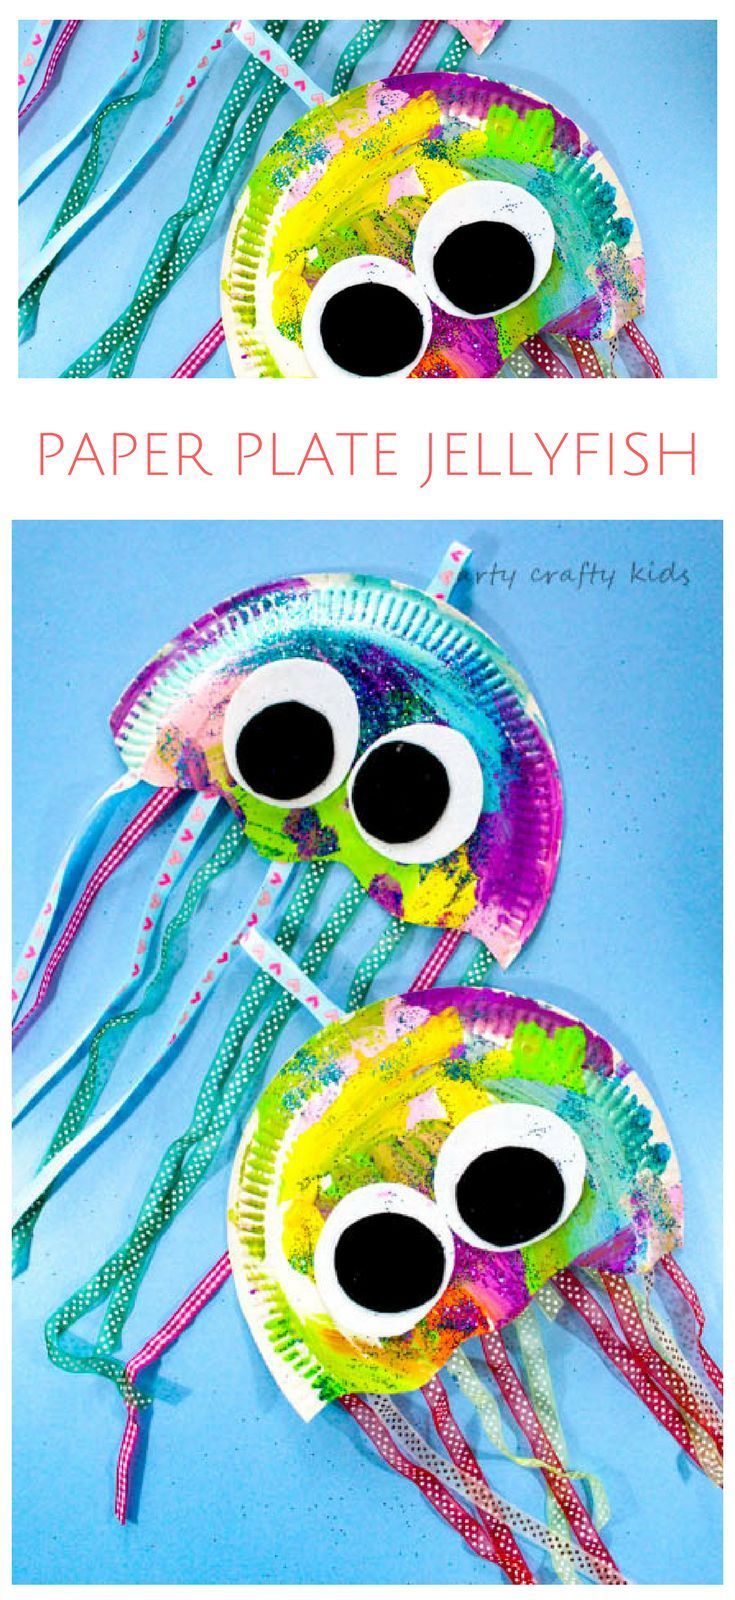 Paper Plate Jellyfish Craft -   25 young kids crafts
 ideas